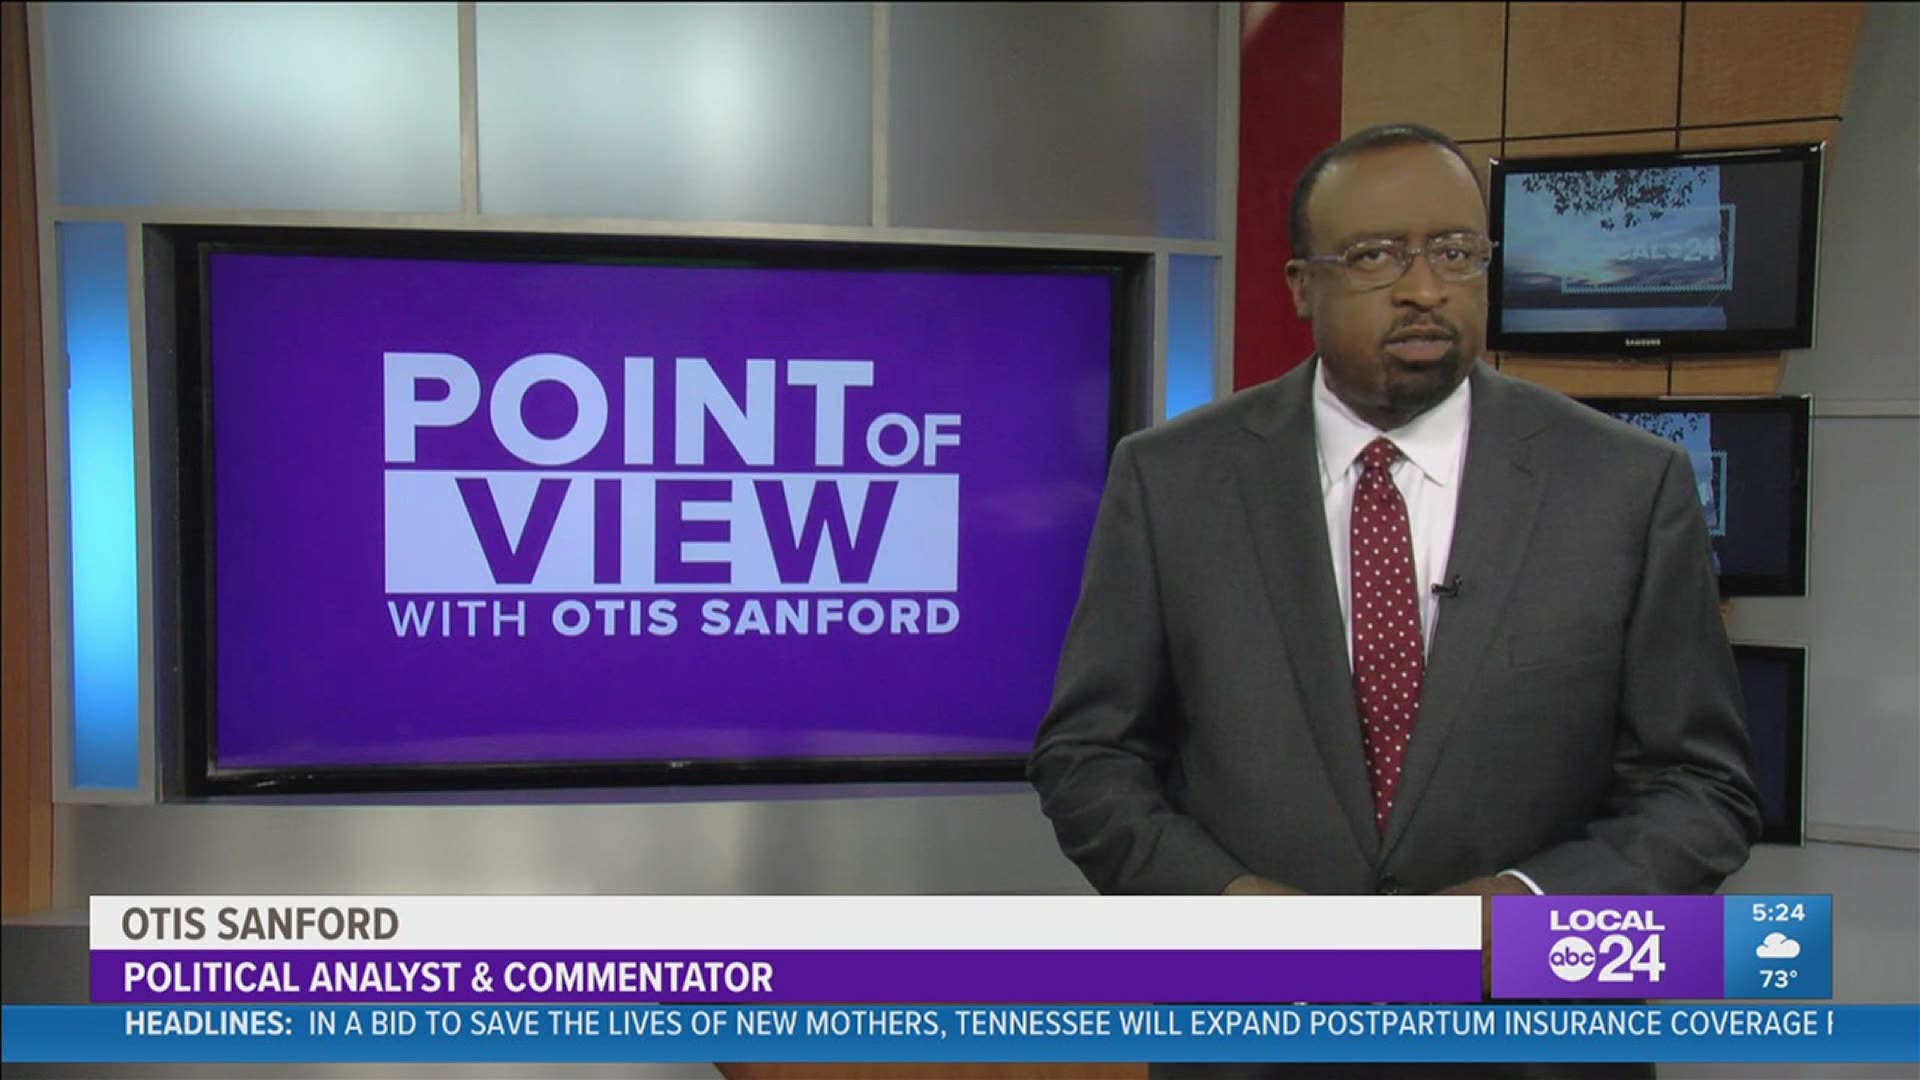 Local 24 News political analyst and commentator Otis Sanford shares his point of view on banning teaching of systemic racism in schools.